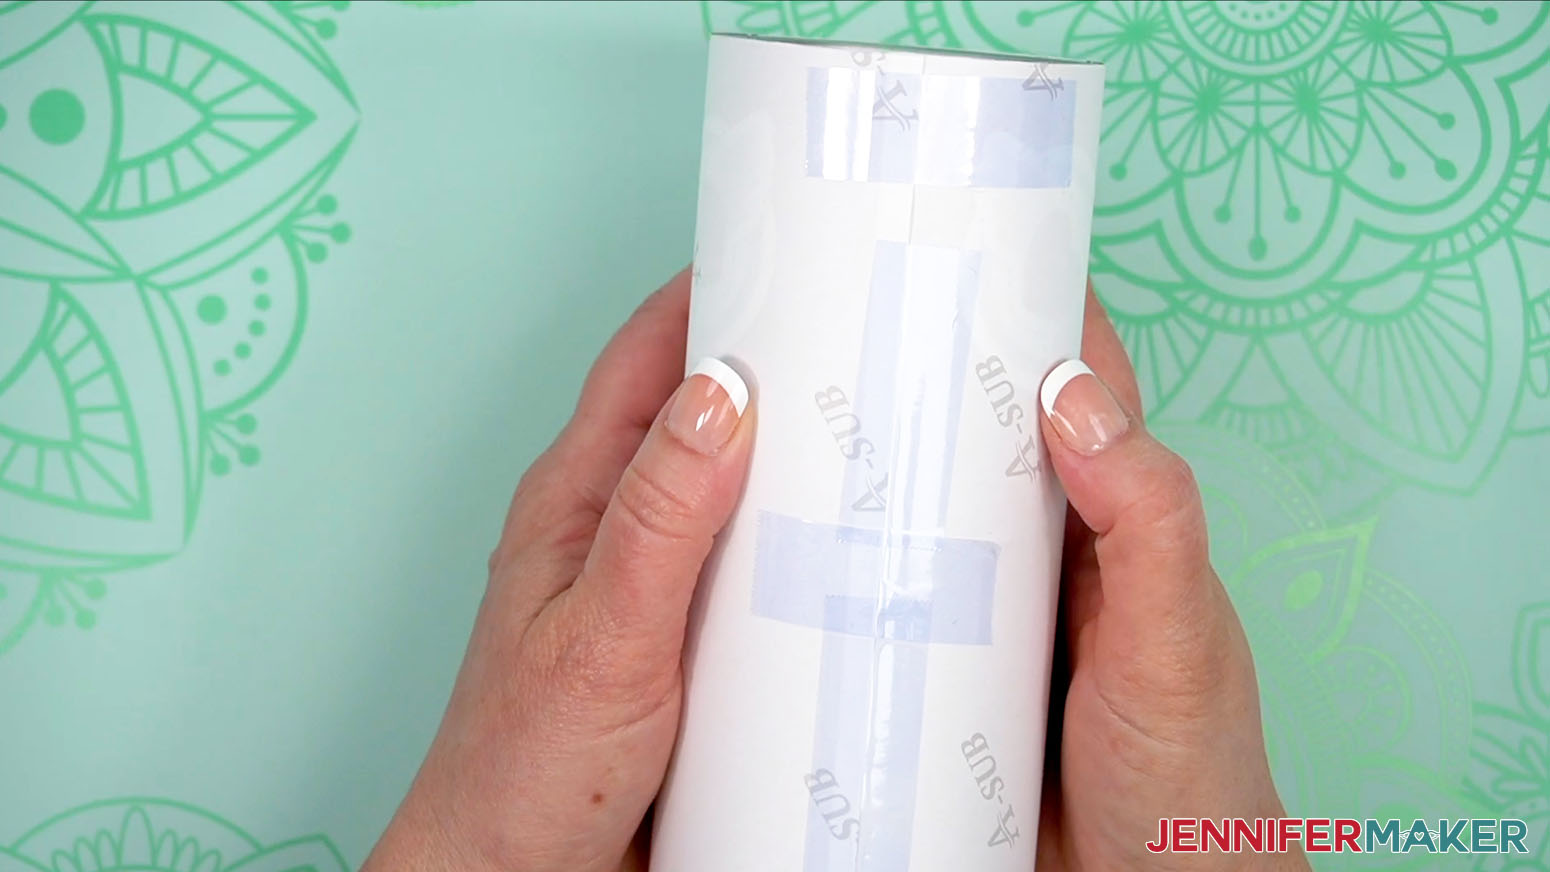 Test the tightness of your taped design by pushing on the paper to see if there are any gaps.